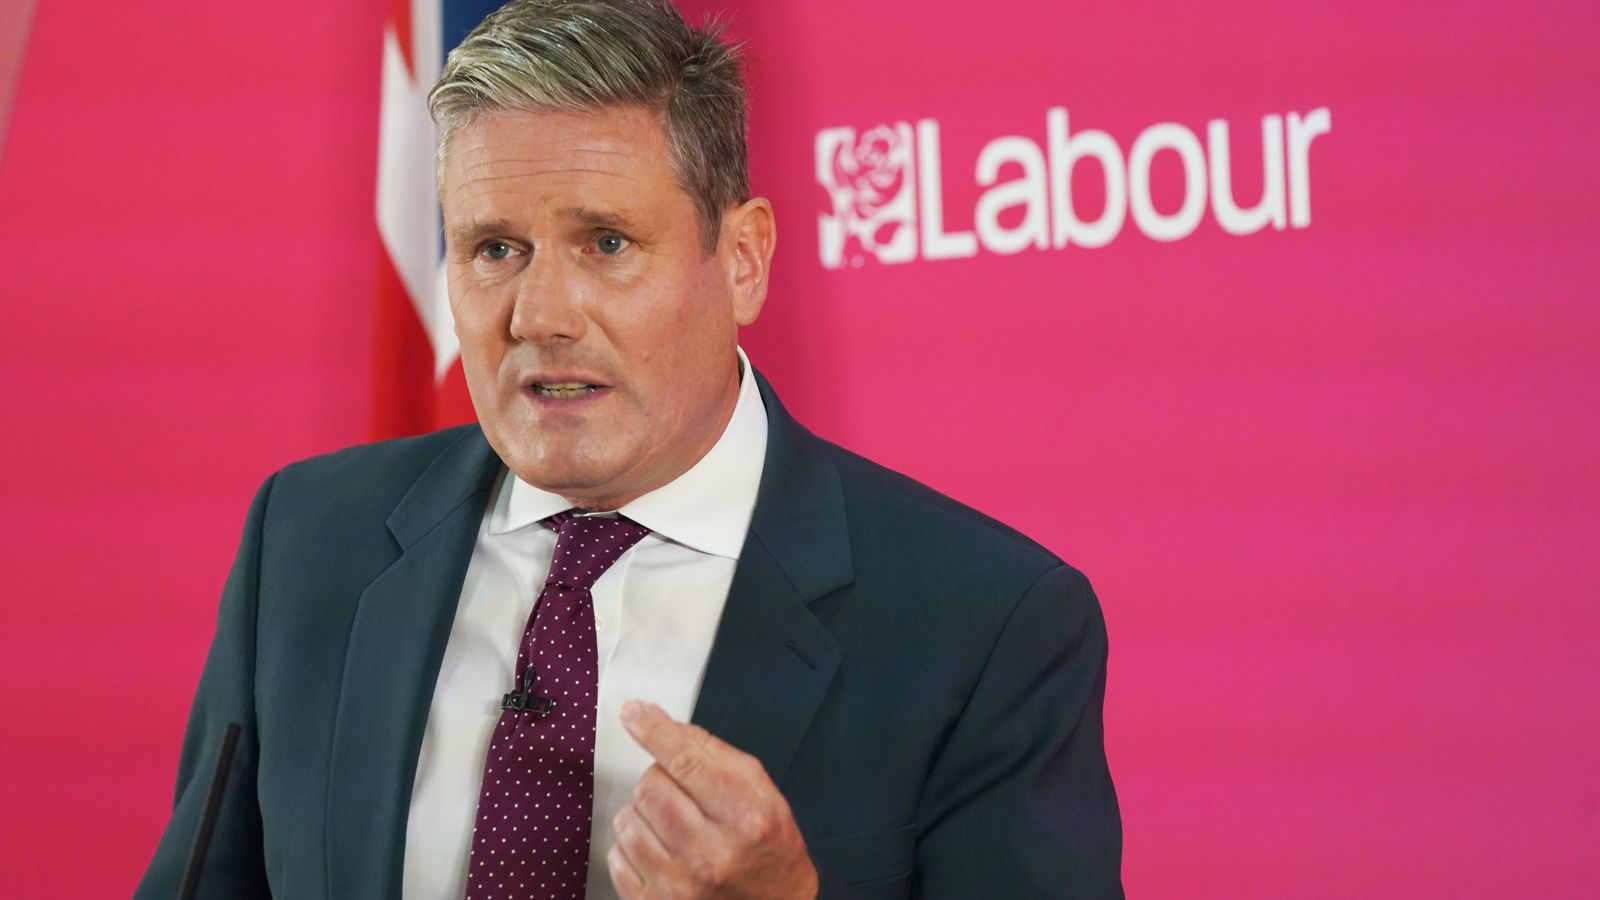 Cost of living: Starmer vows to extend windfall tax to freeze family fuel bills as he reveals Labour’s ’emergency’ plan to tackle crisis |  PoliticsNews